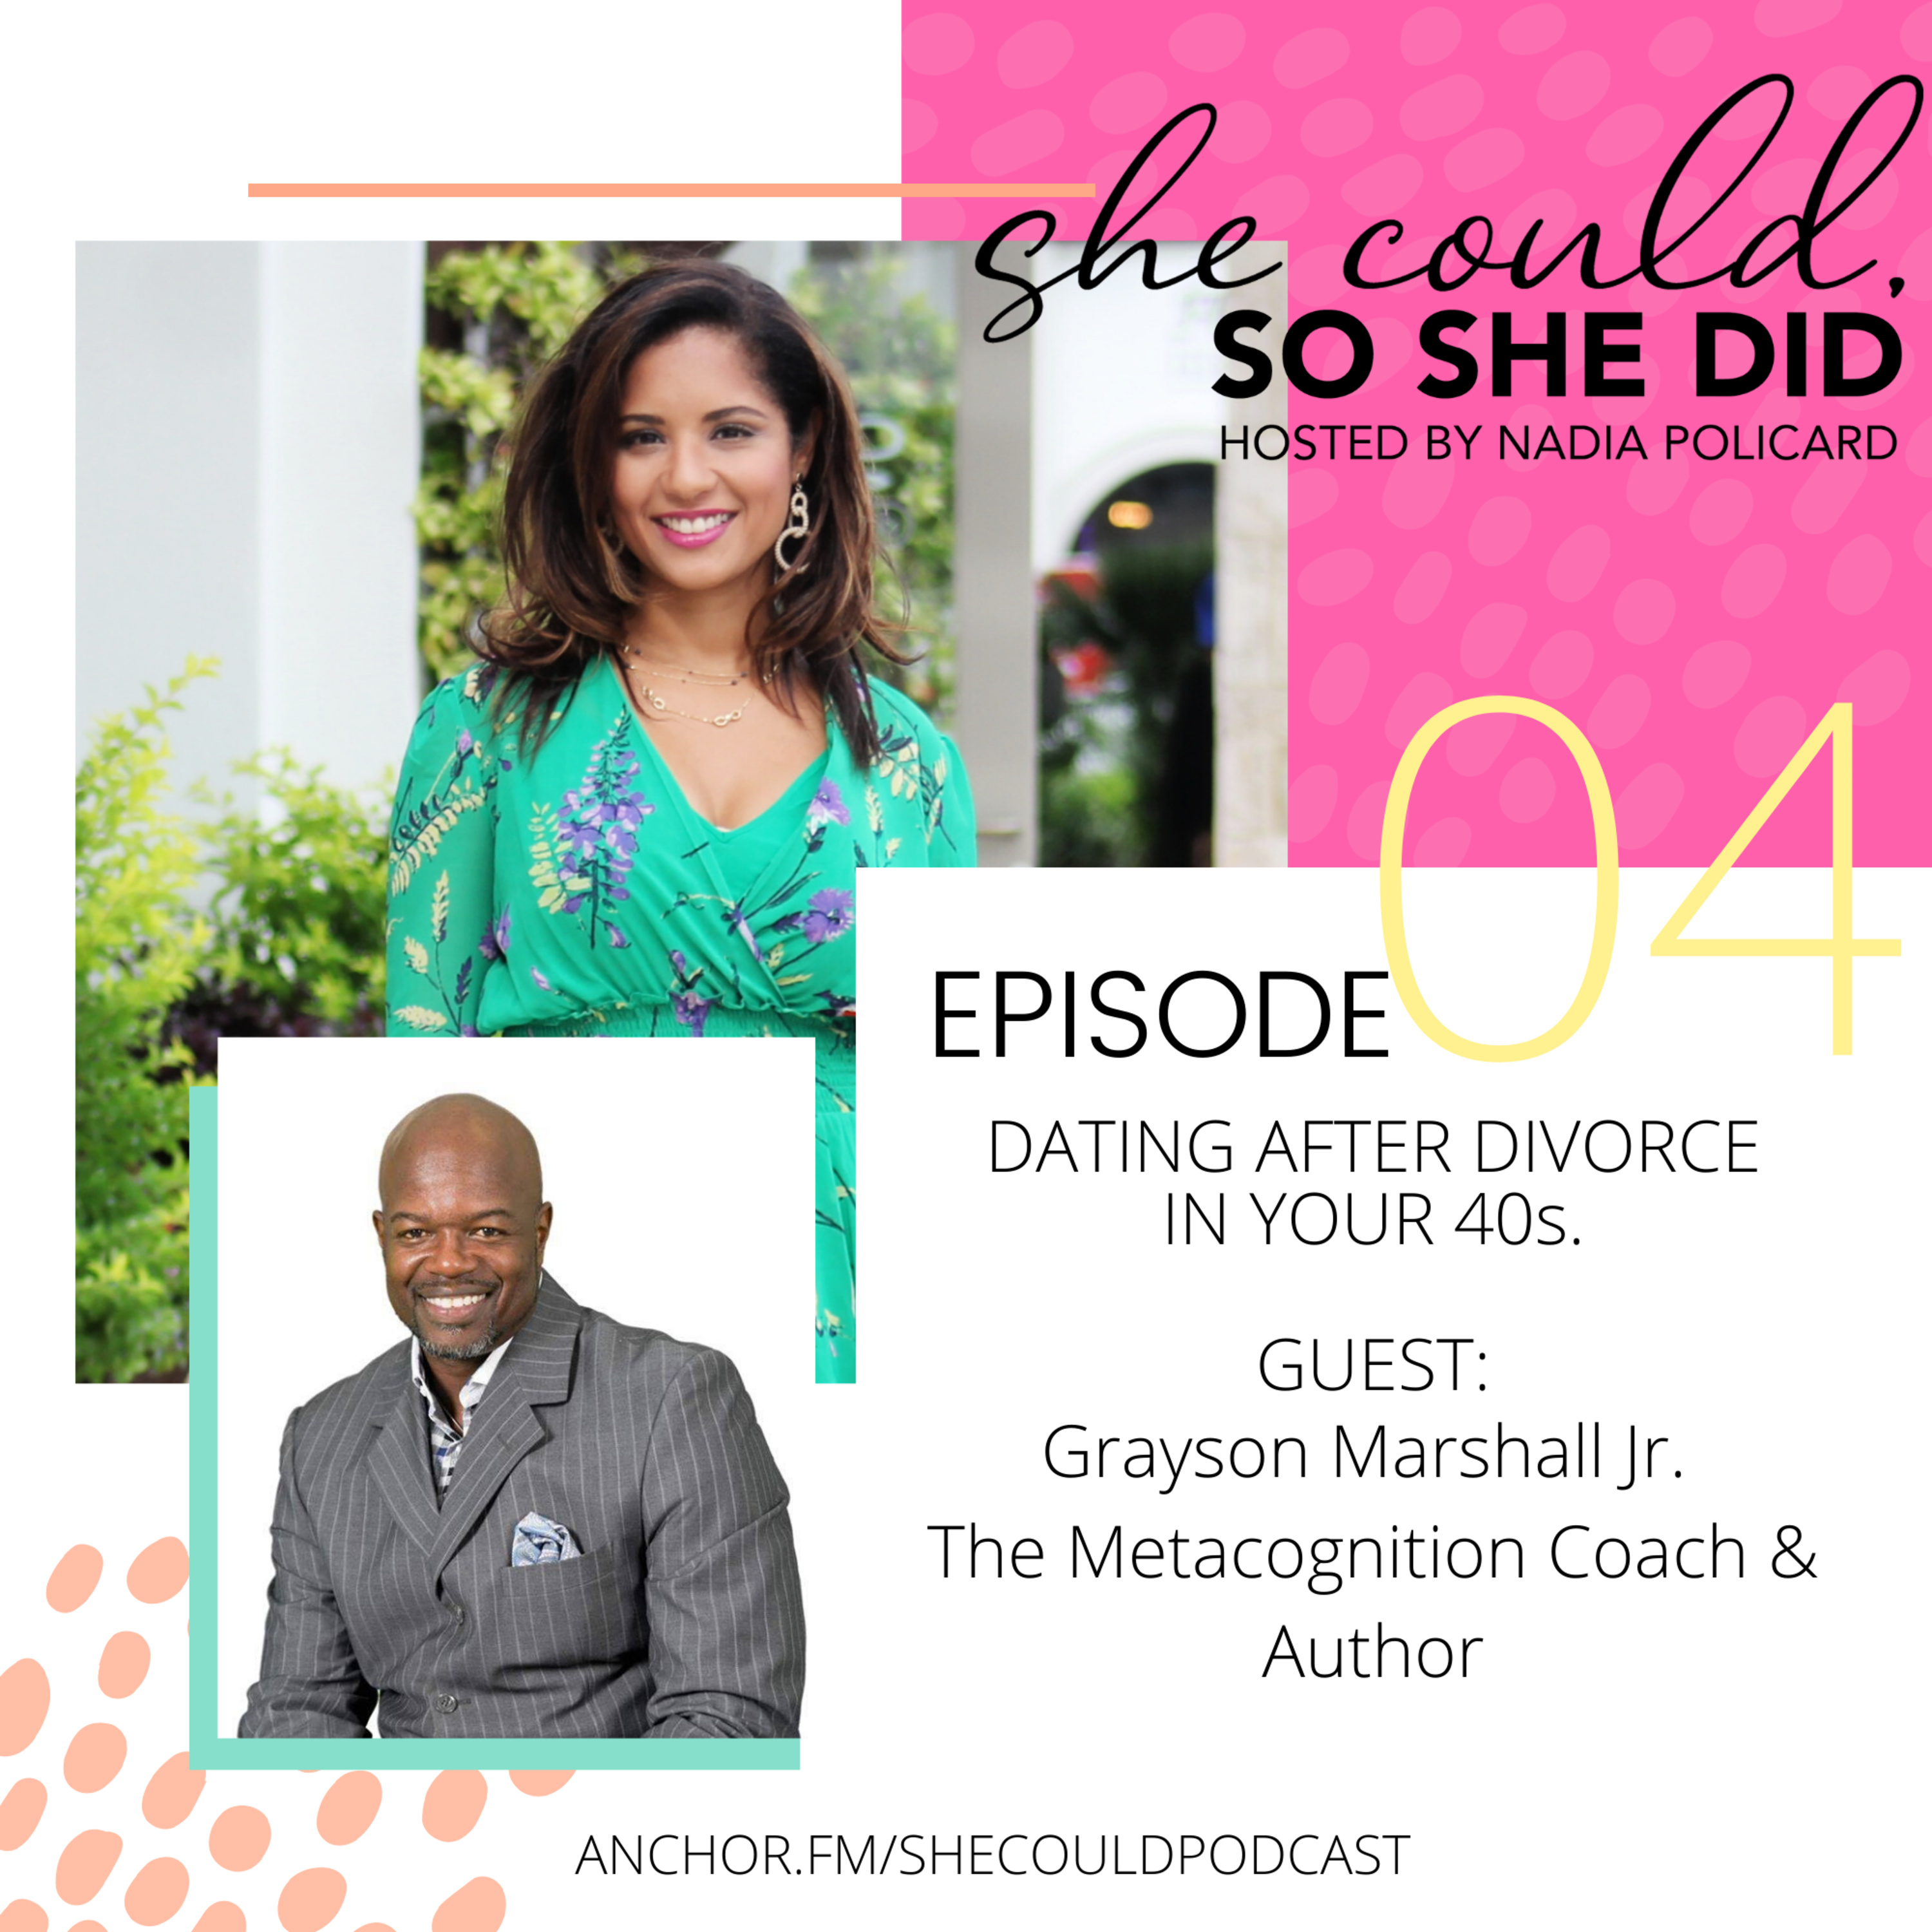 Episode 4: [Part 1]Can Alpha Women Date Alpha Males? + Letting Your Man Lead w/Guest: Grayson Marshall, Jr.